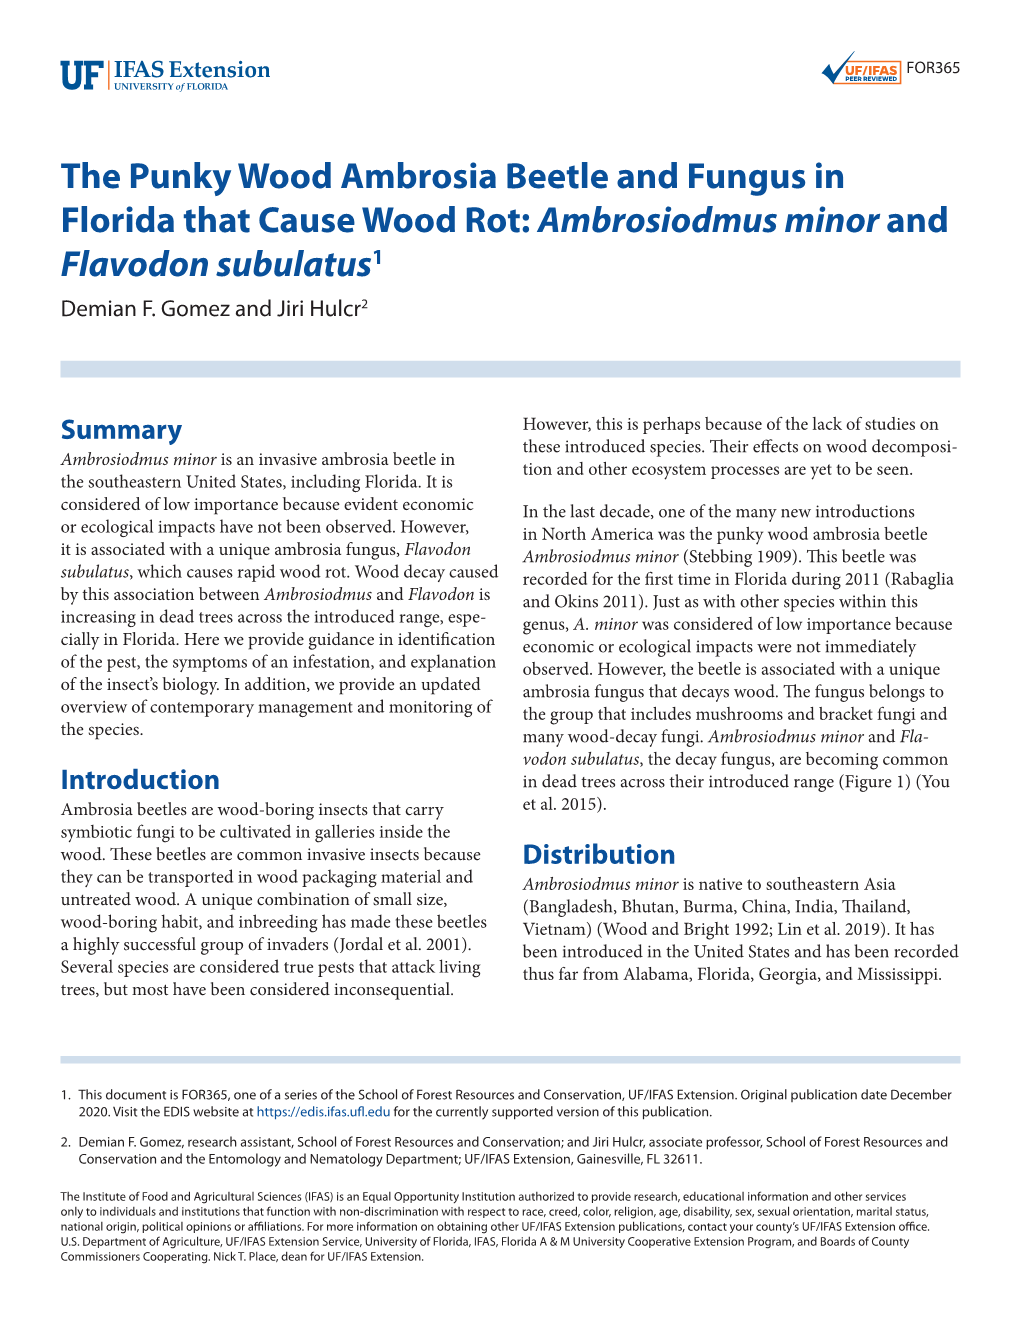 The Punky Wood Ambrosia Beetle and Fungus in Florida That Cause Wood Rot: Ambrosiodmus Minor and Flavodon Subulatus1 Demian F